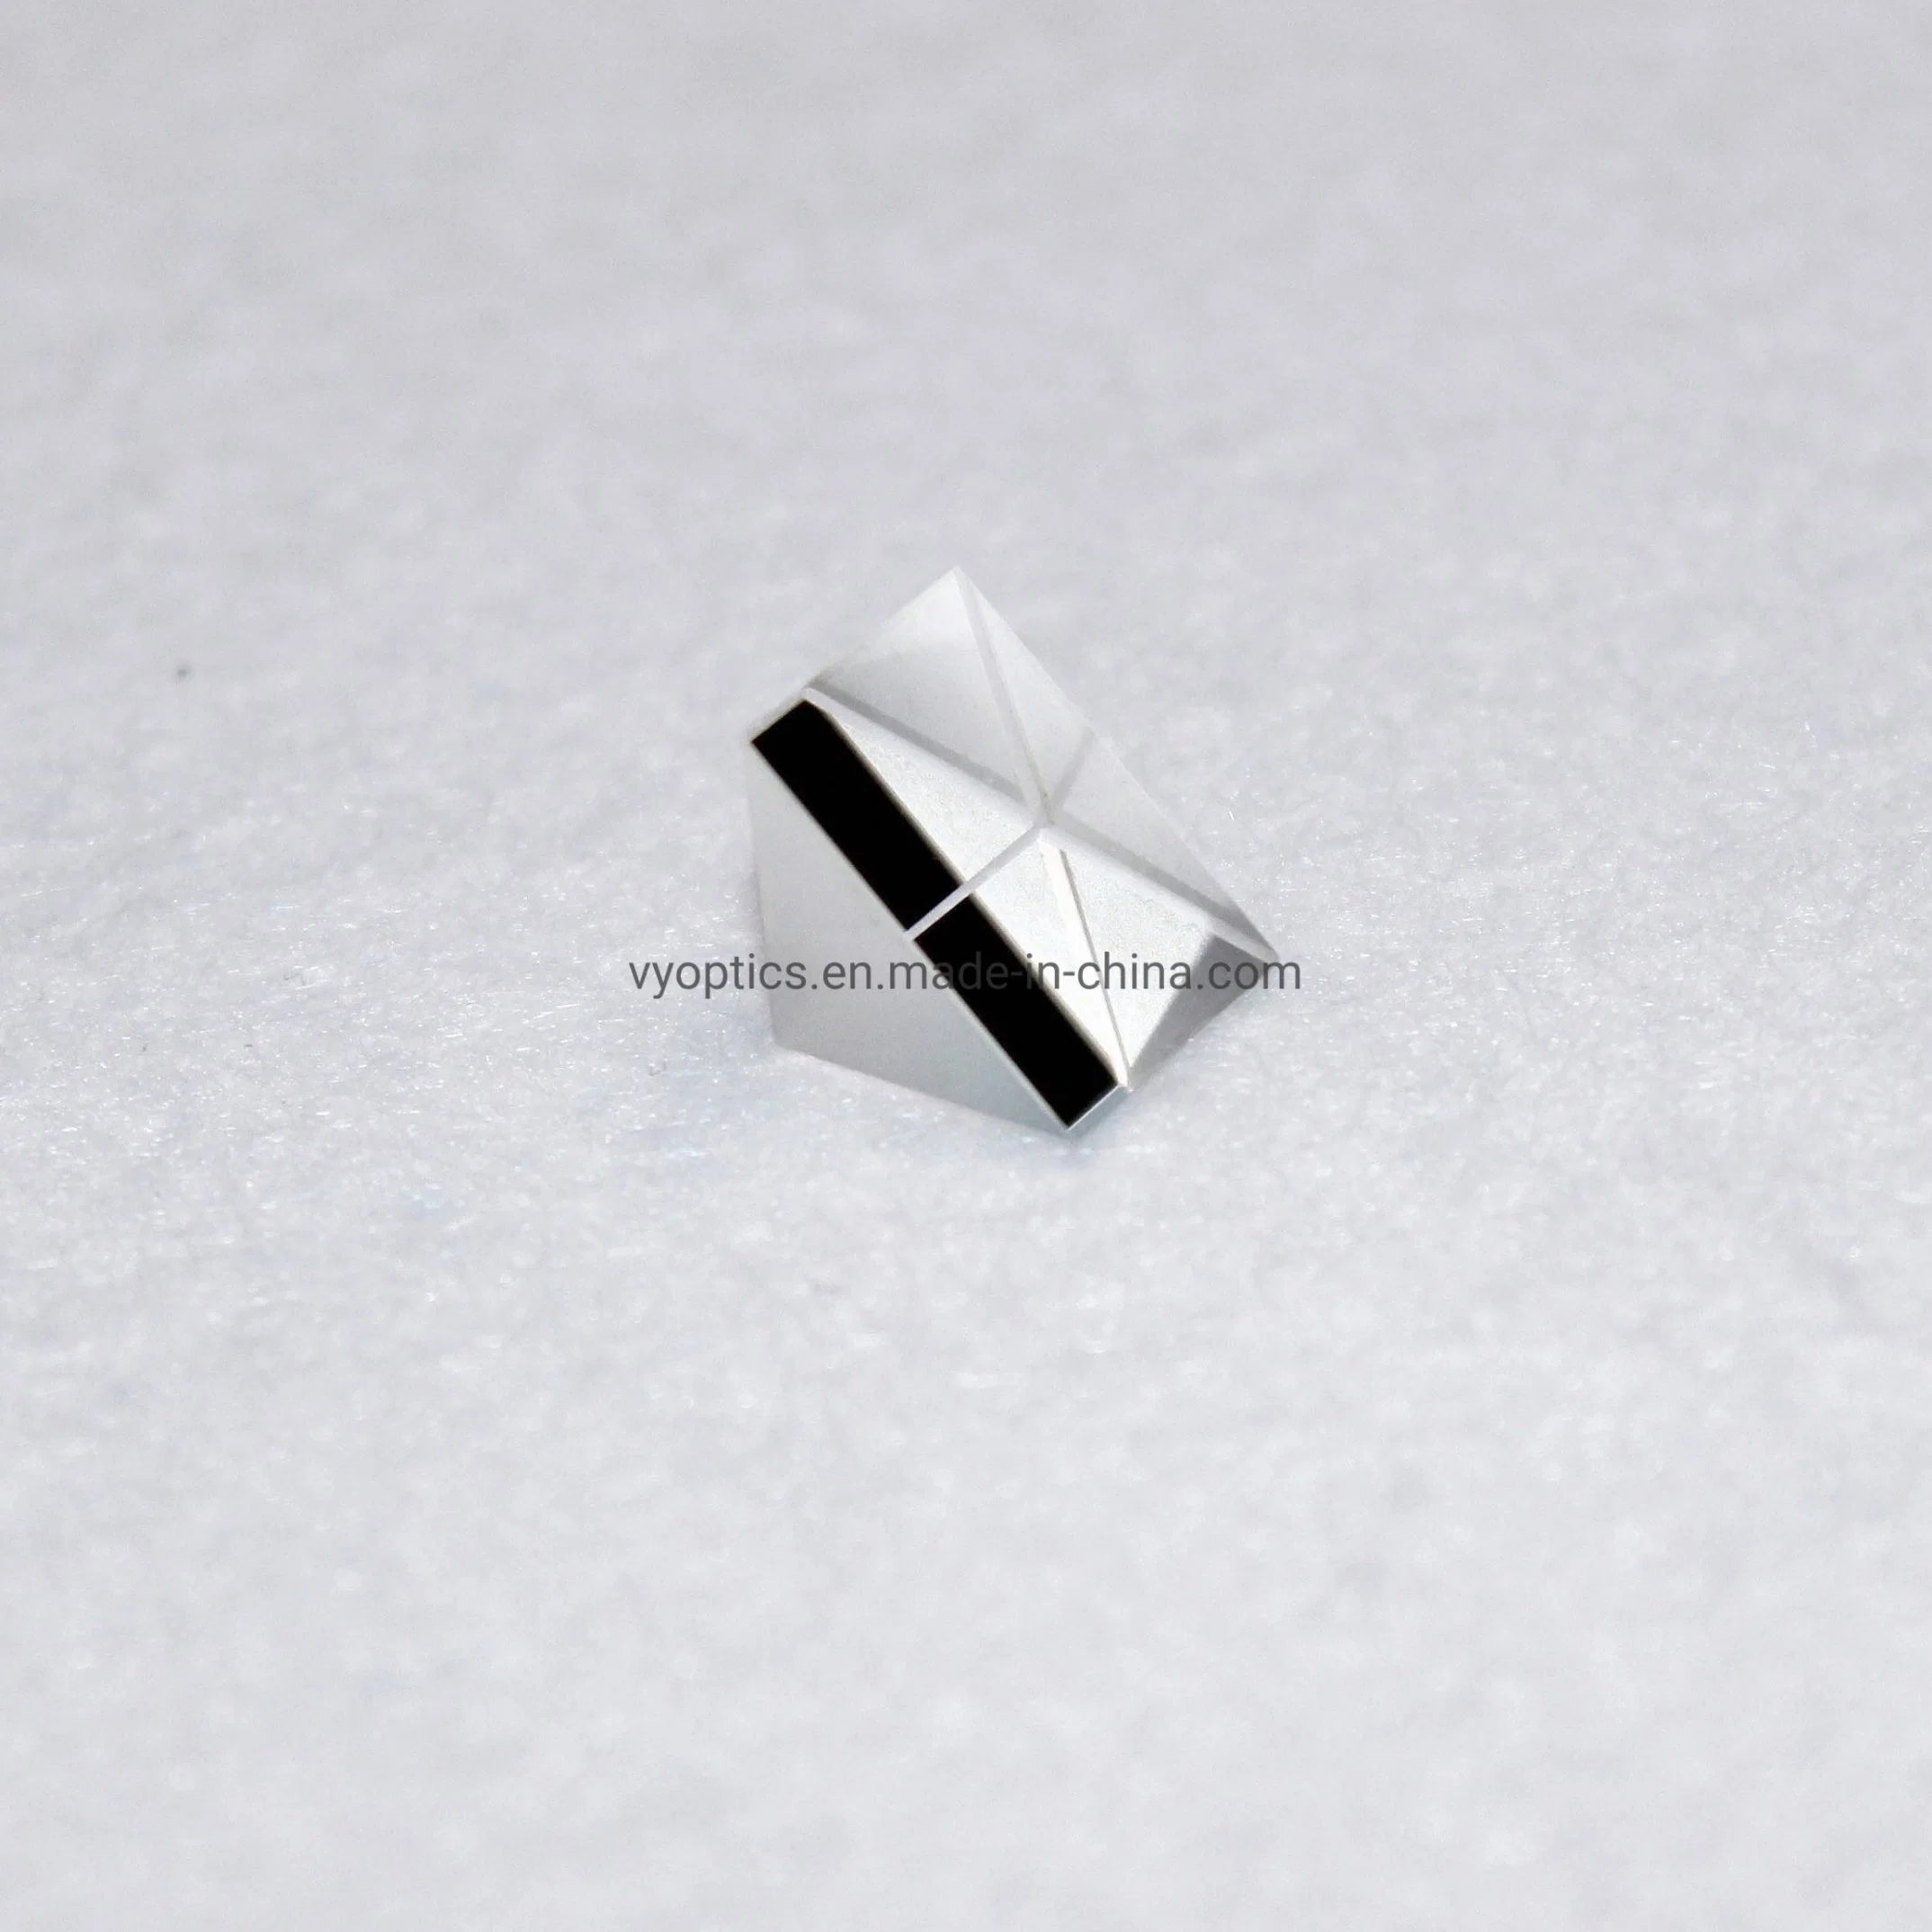 Best Quality High Polished Bk7/Fused Silica/Sapphire/CaF2 Glass Optical Right Angle Prism